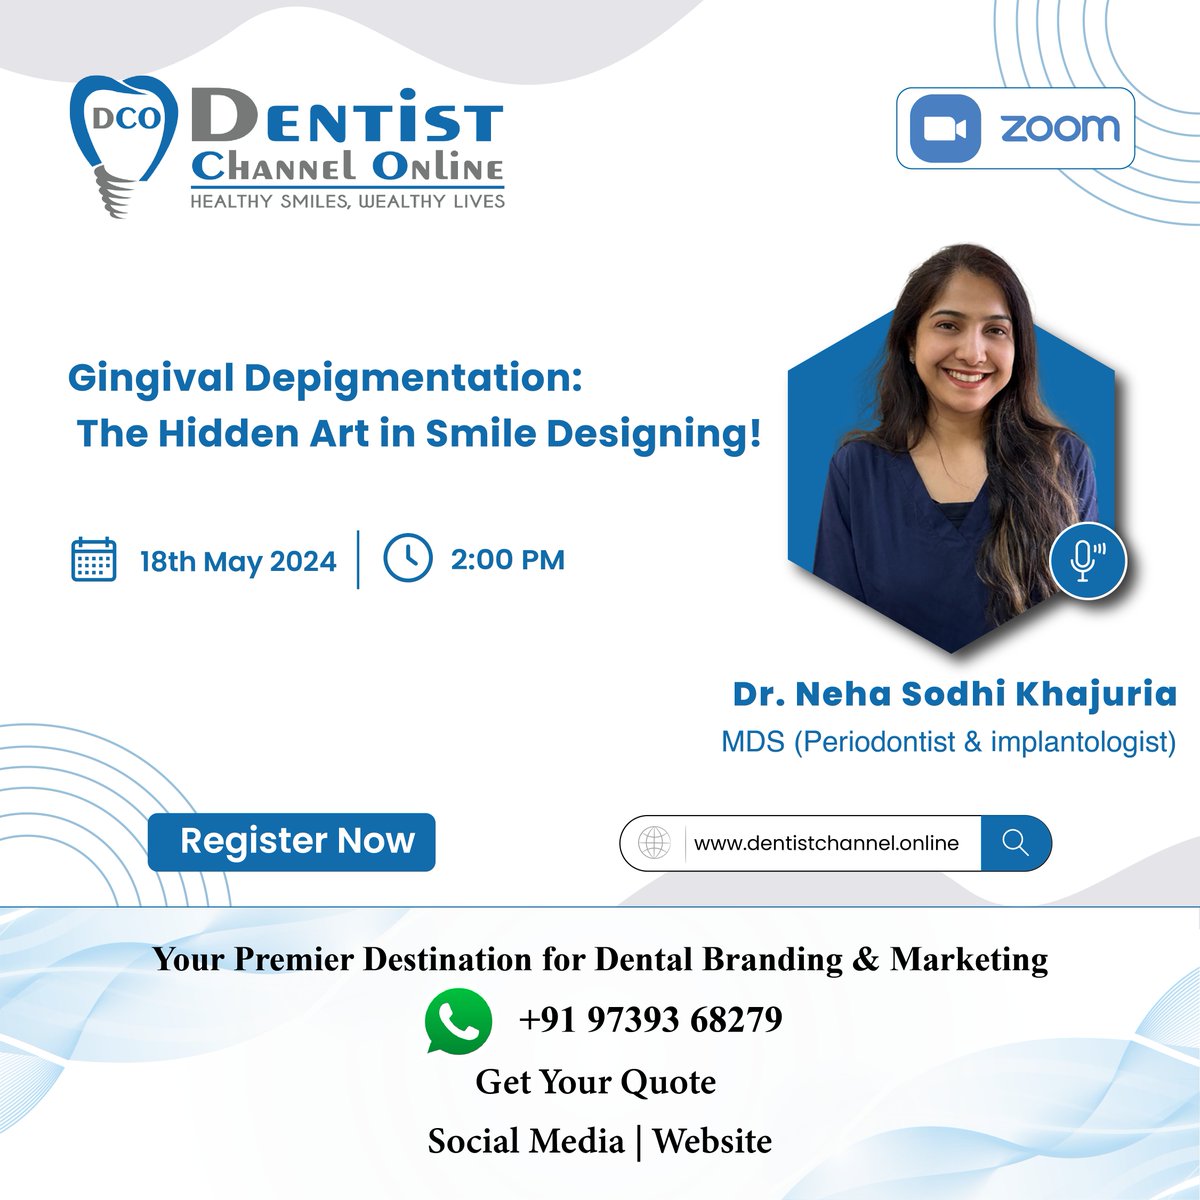 Dentist Channel Online Presents ...
LIVE WEBINAR 🎥🎥

📣 TOPIC
Gingival Depigmentation: The Hidden Art in Smile Designing!

📅 18th May, 2024 02:00 PM IST

🔴 Register Now  🔴
dentistchannel.online/events/show/gi…
#dentistry #dentaleducation #dentist #dentistryworld #dentalwebinar